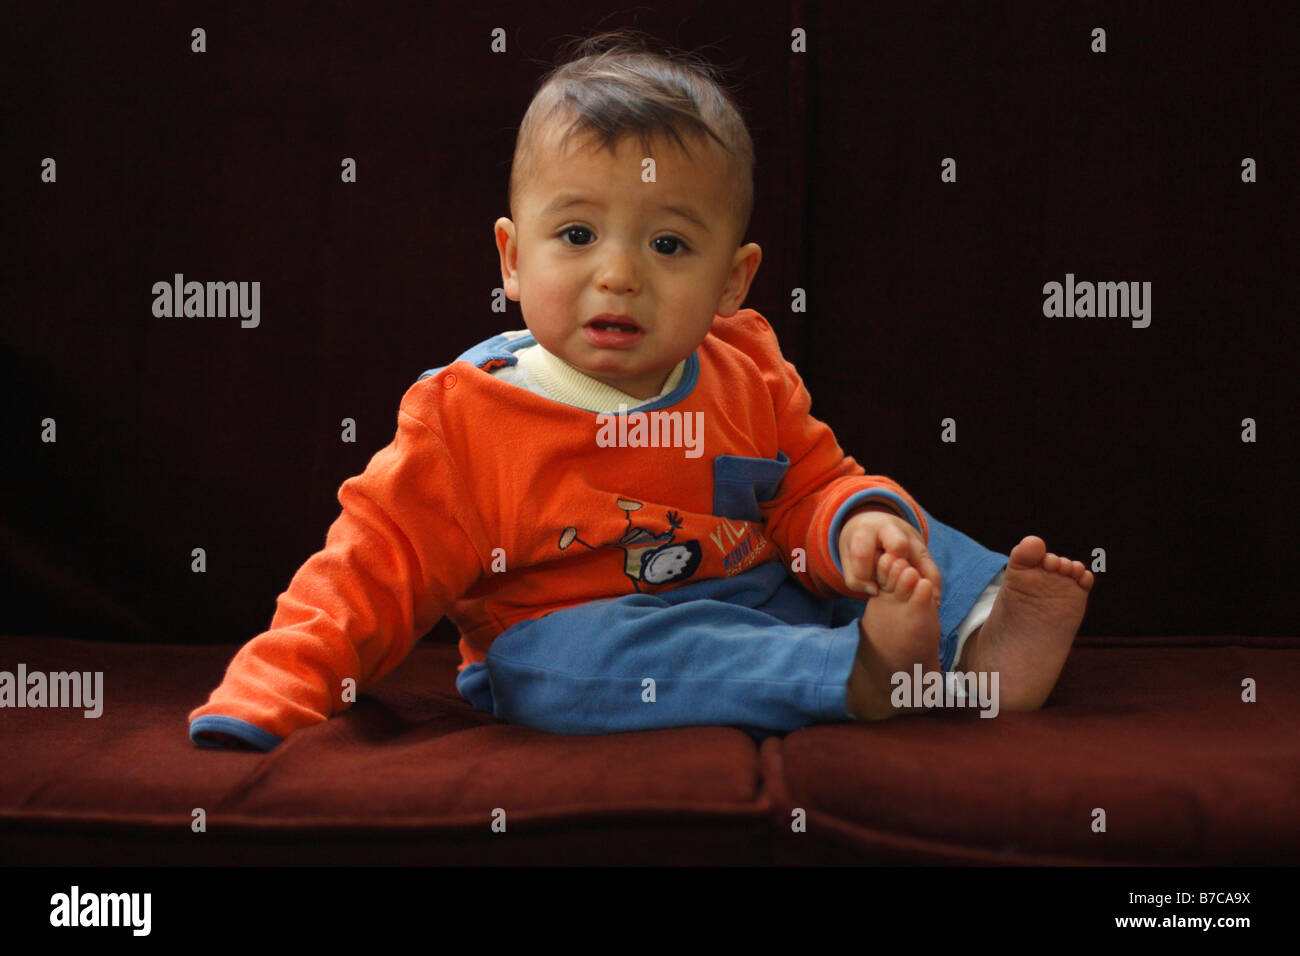 Upset one year old boy sitting on a couch. Stock Photo